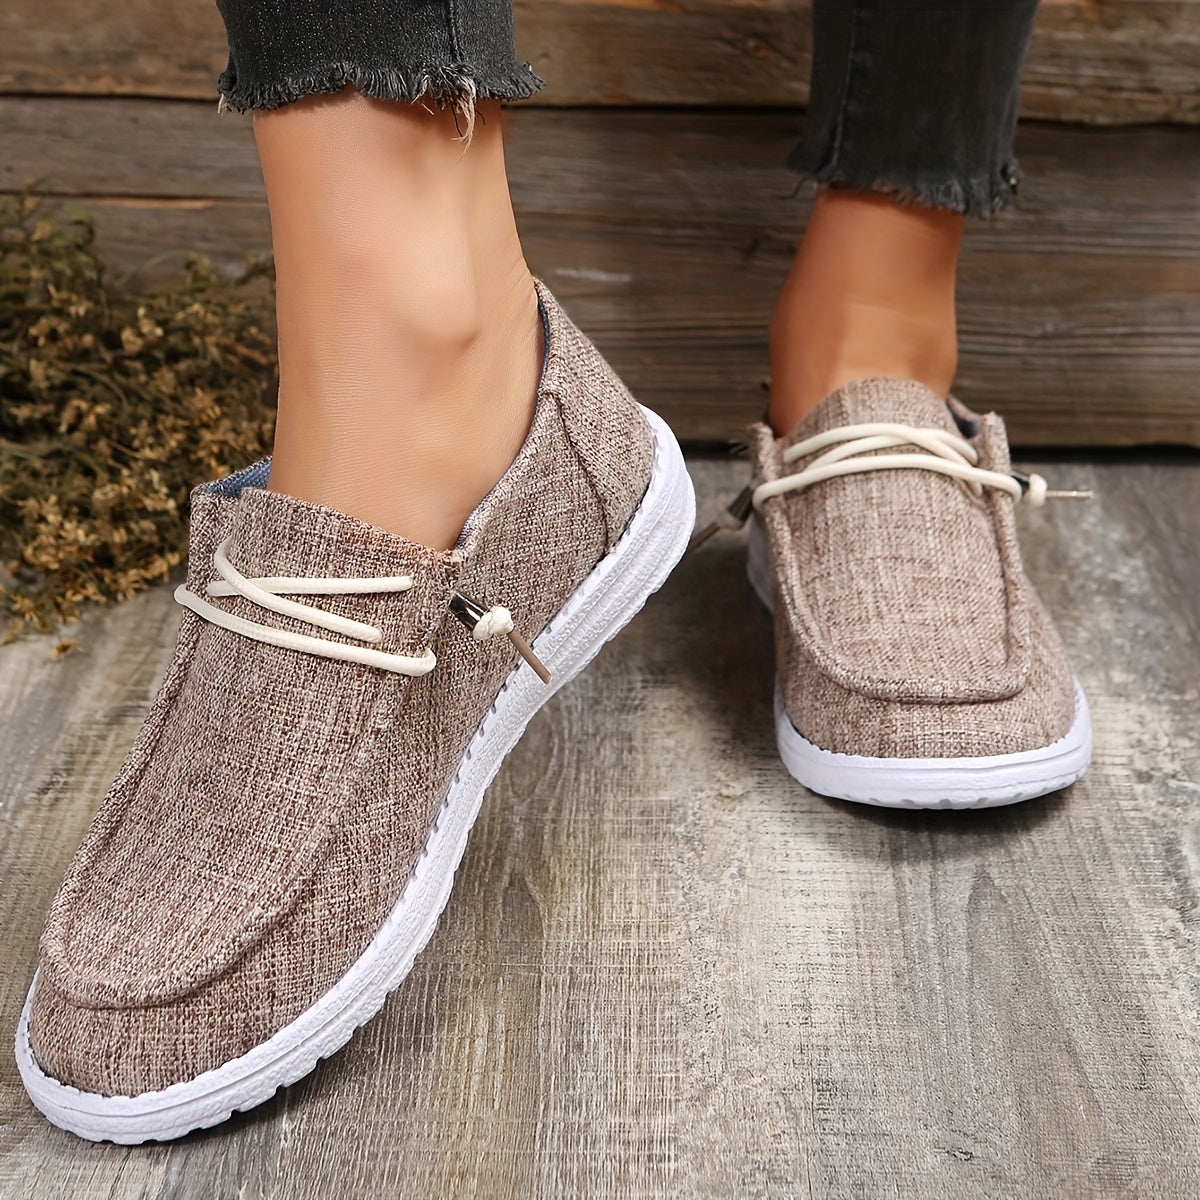 Solid Color Flat Shoes, Slip On Low-top Canvas Shoes